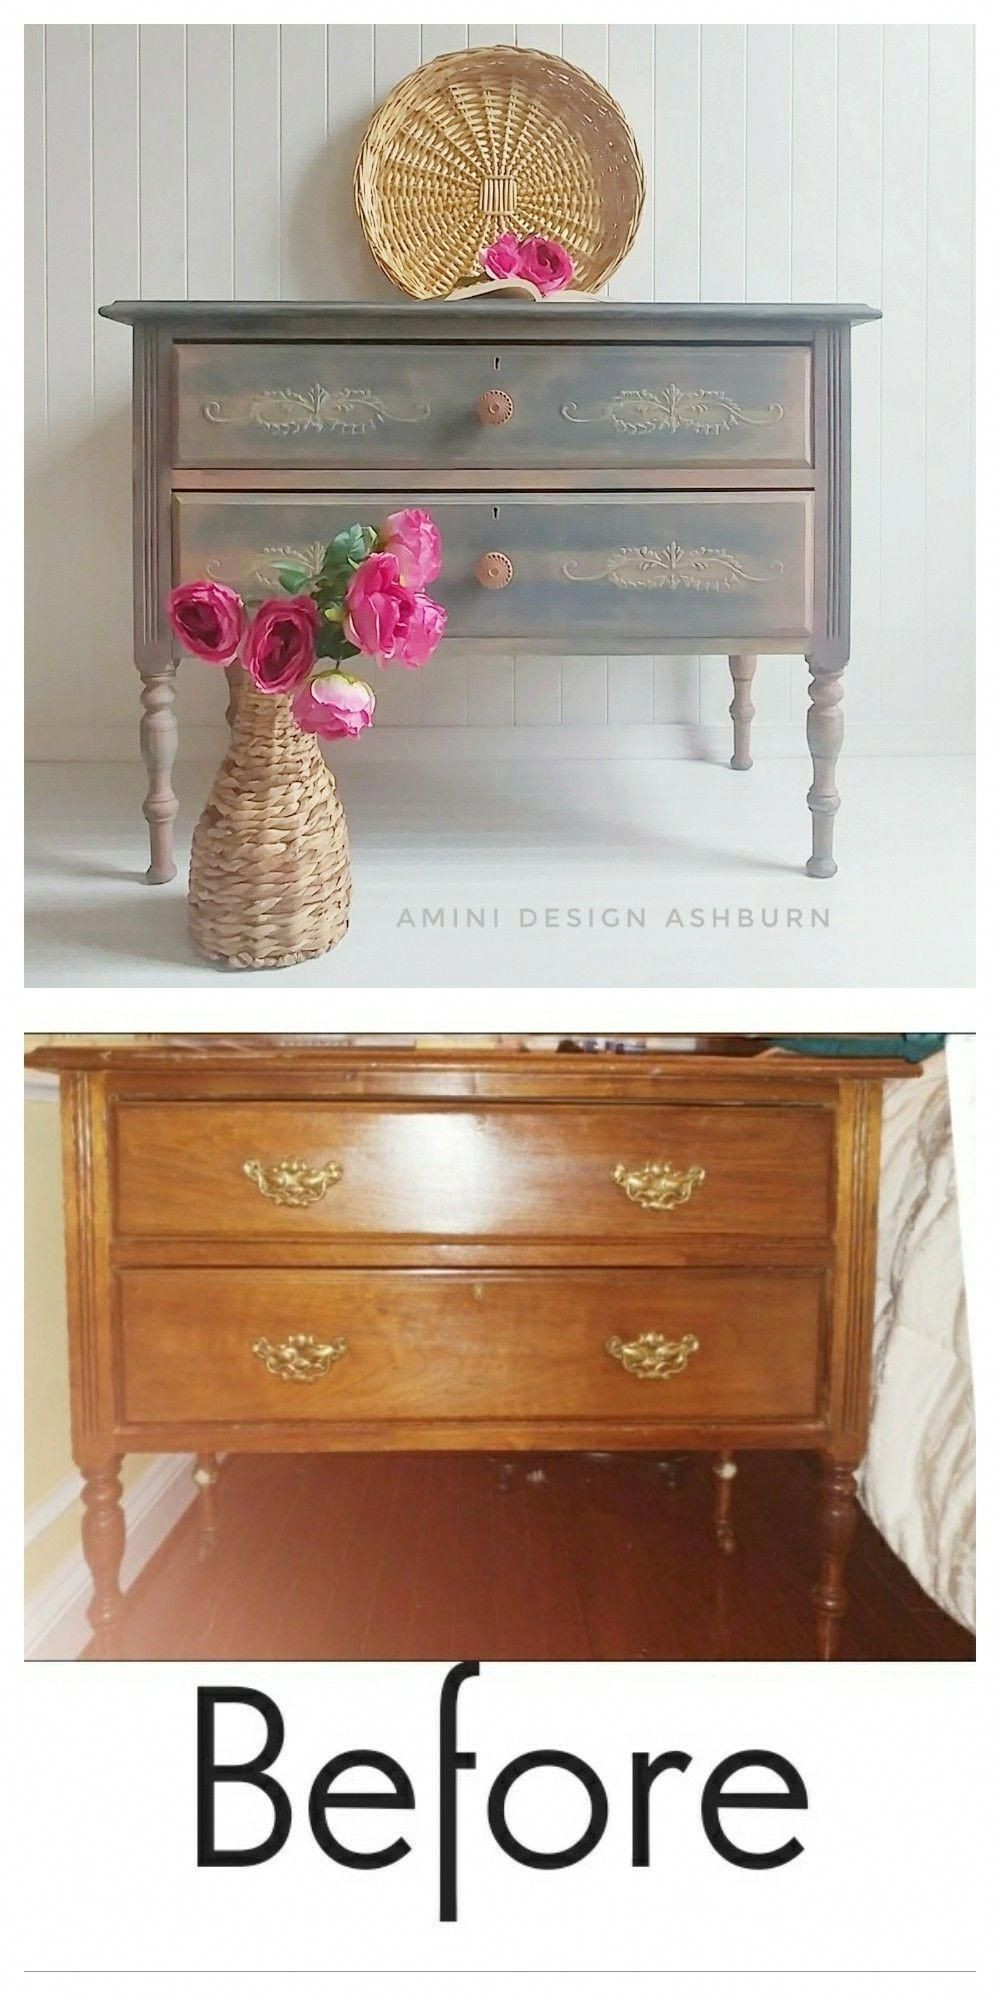 Cheap Shabby Chic Bedroom Furniture
 Cheap Shabby Chic Bedroom Furniture